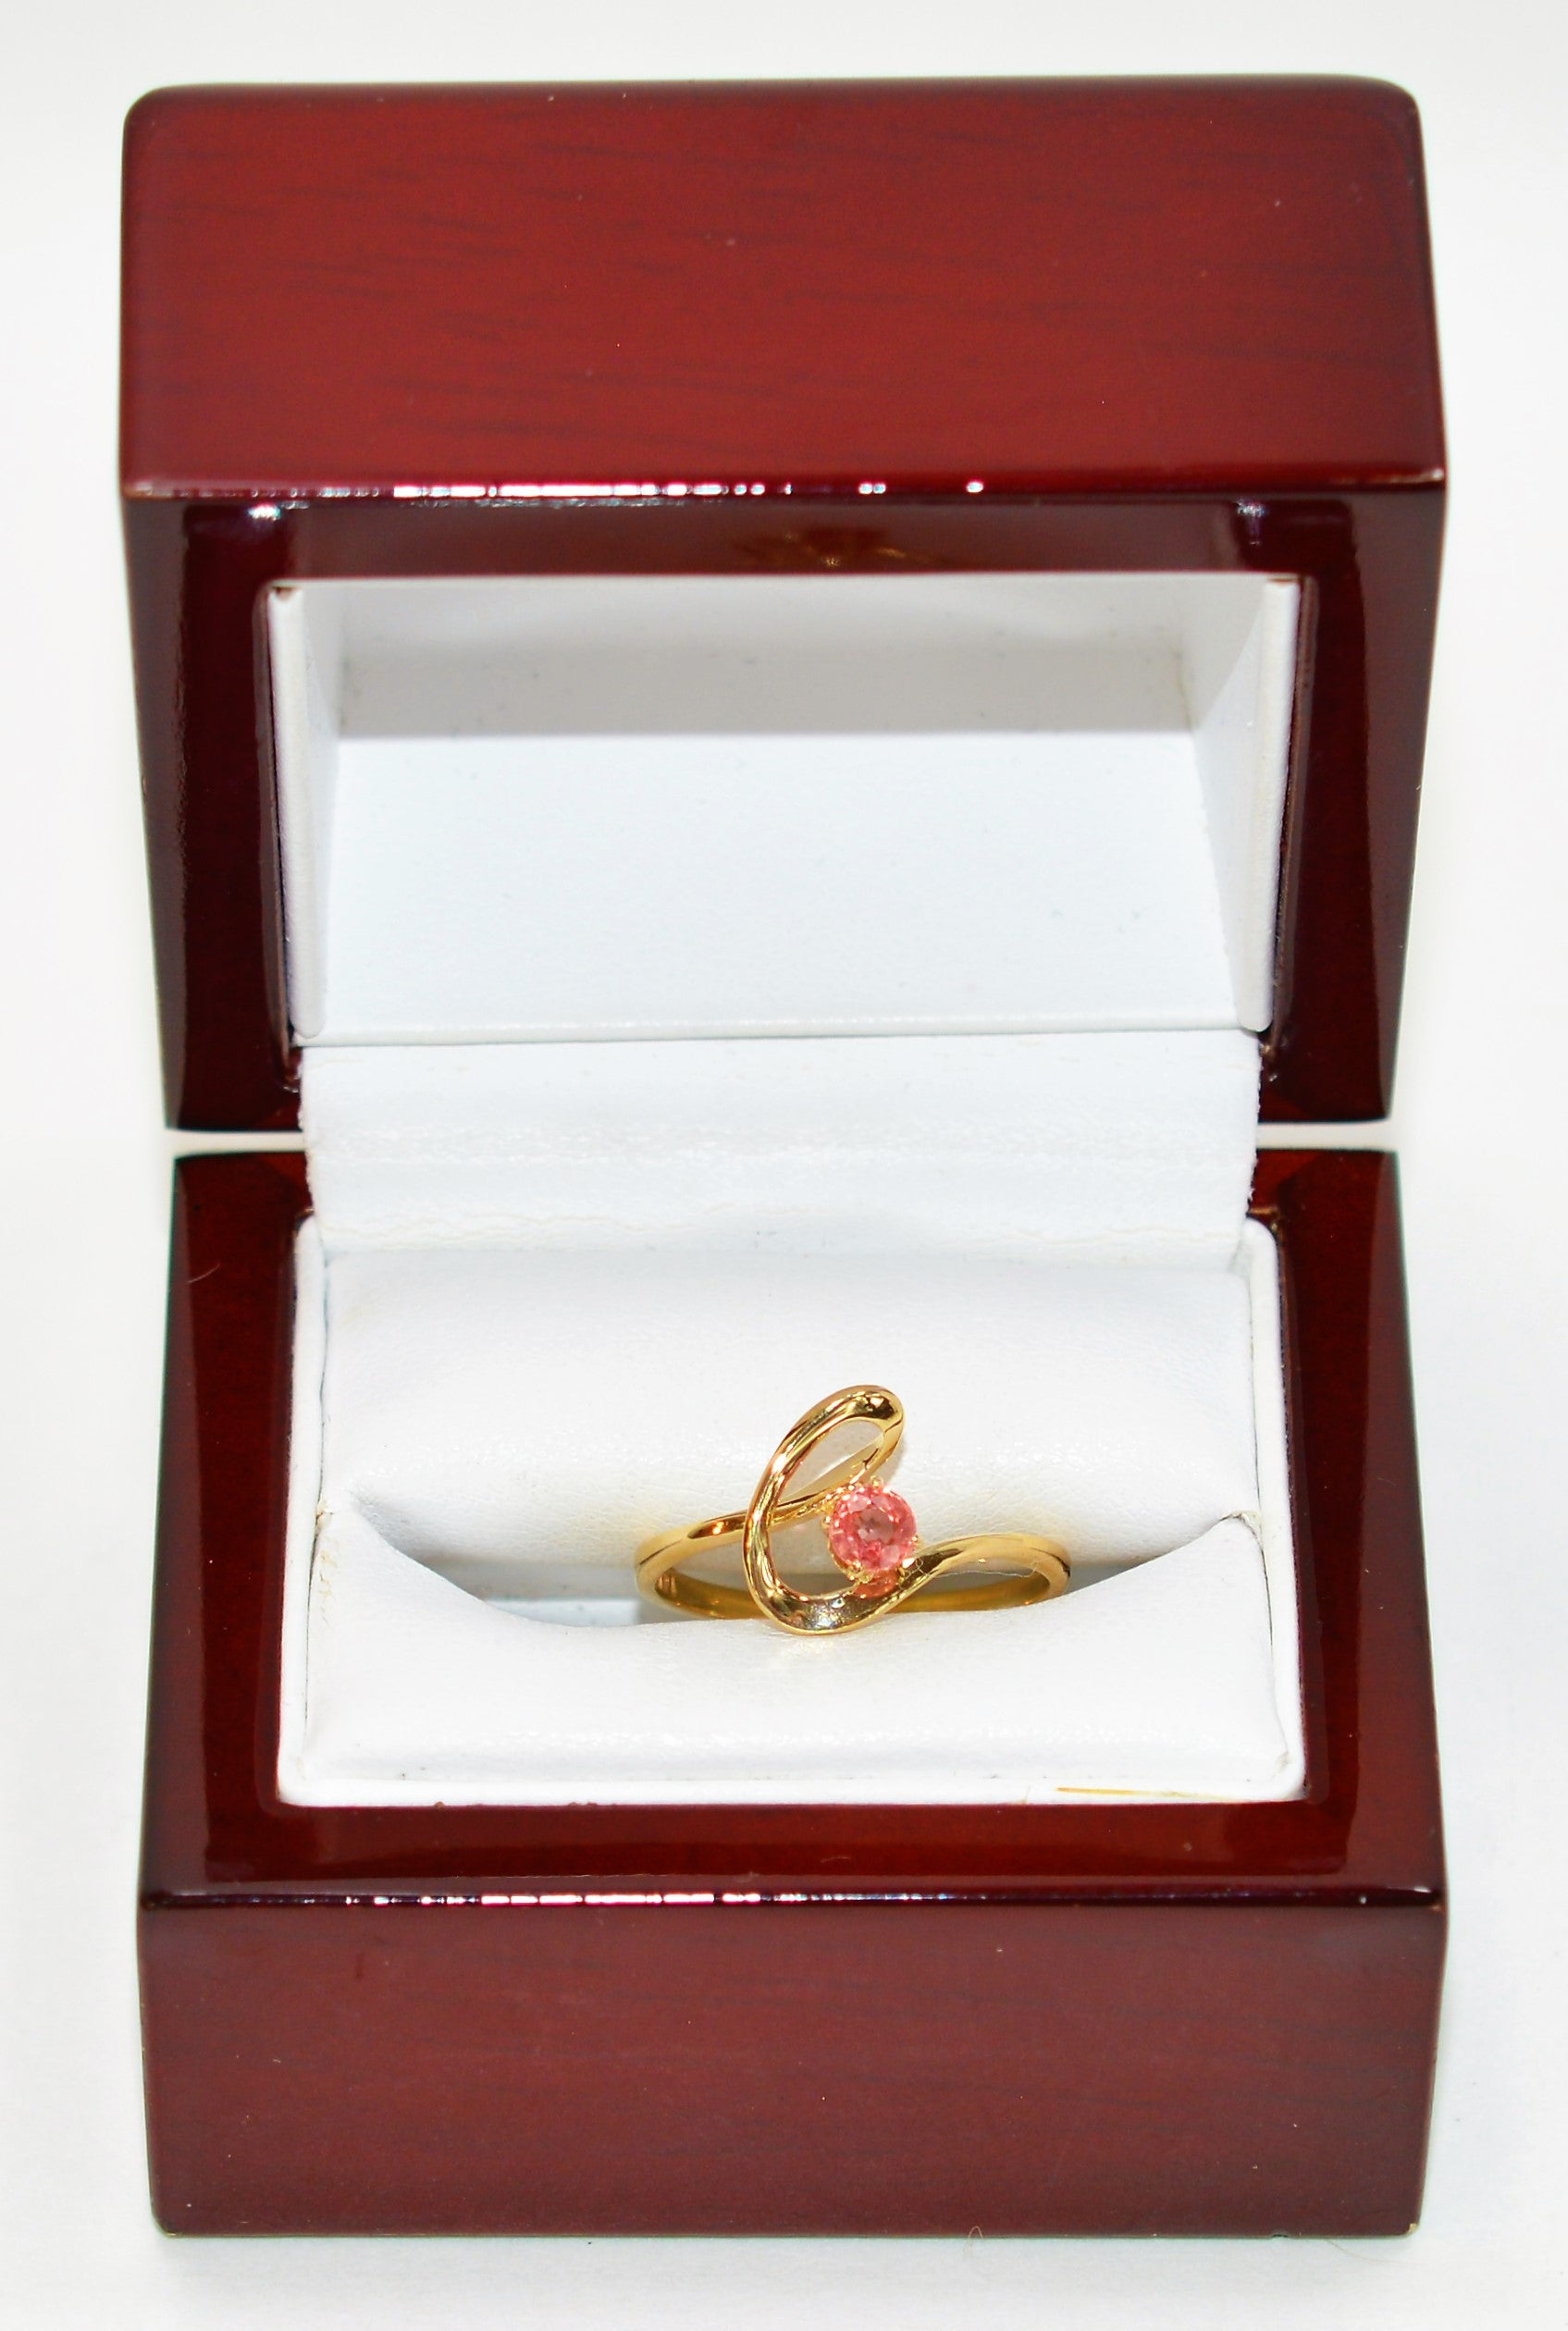 Natural Padparadscha Sapphire Ring 14K Solid Gold .31ct Solitaire Gemstone Women's Ring Estate Jewelry Fine Jewellery